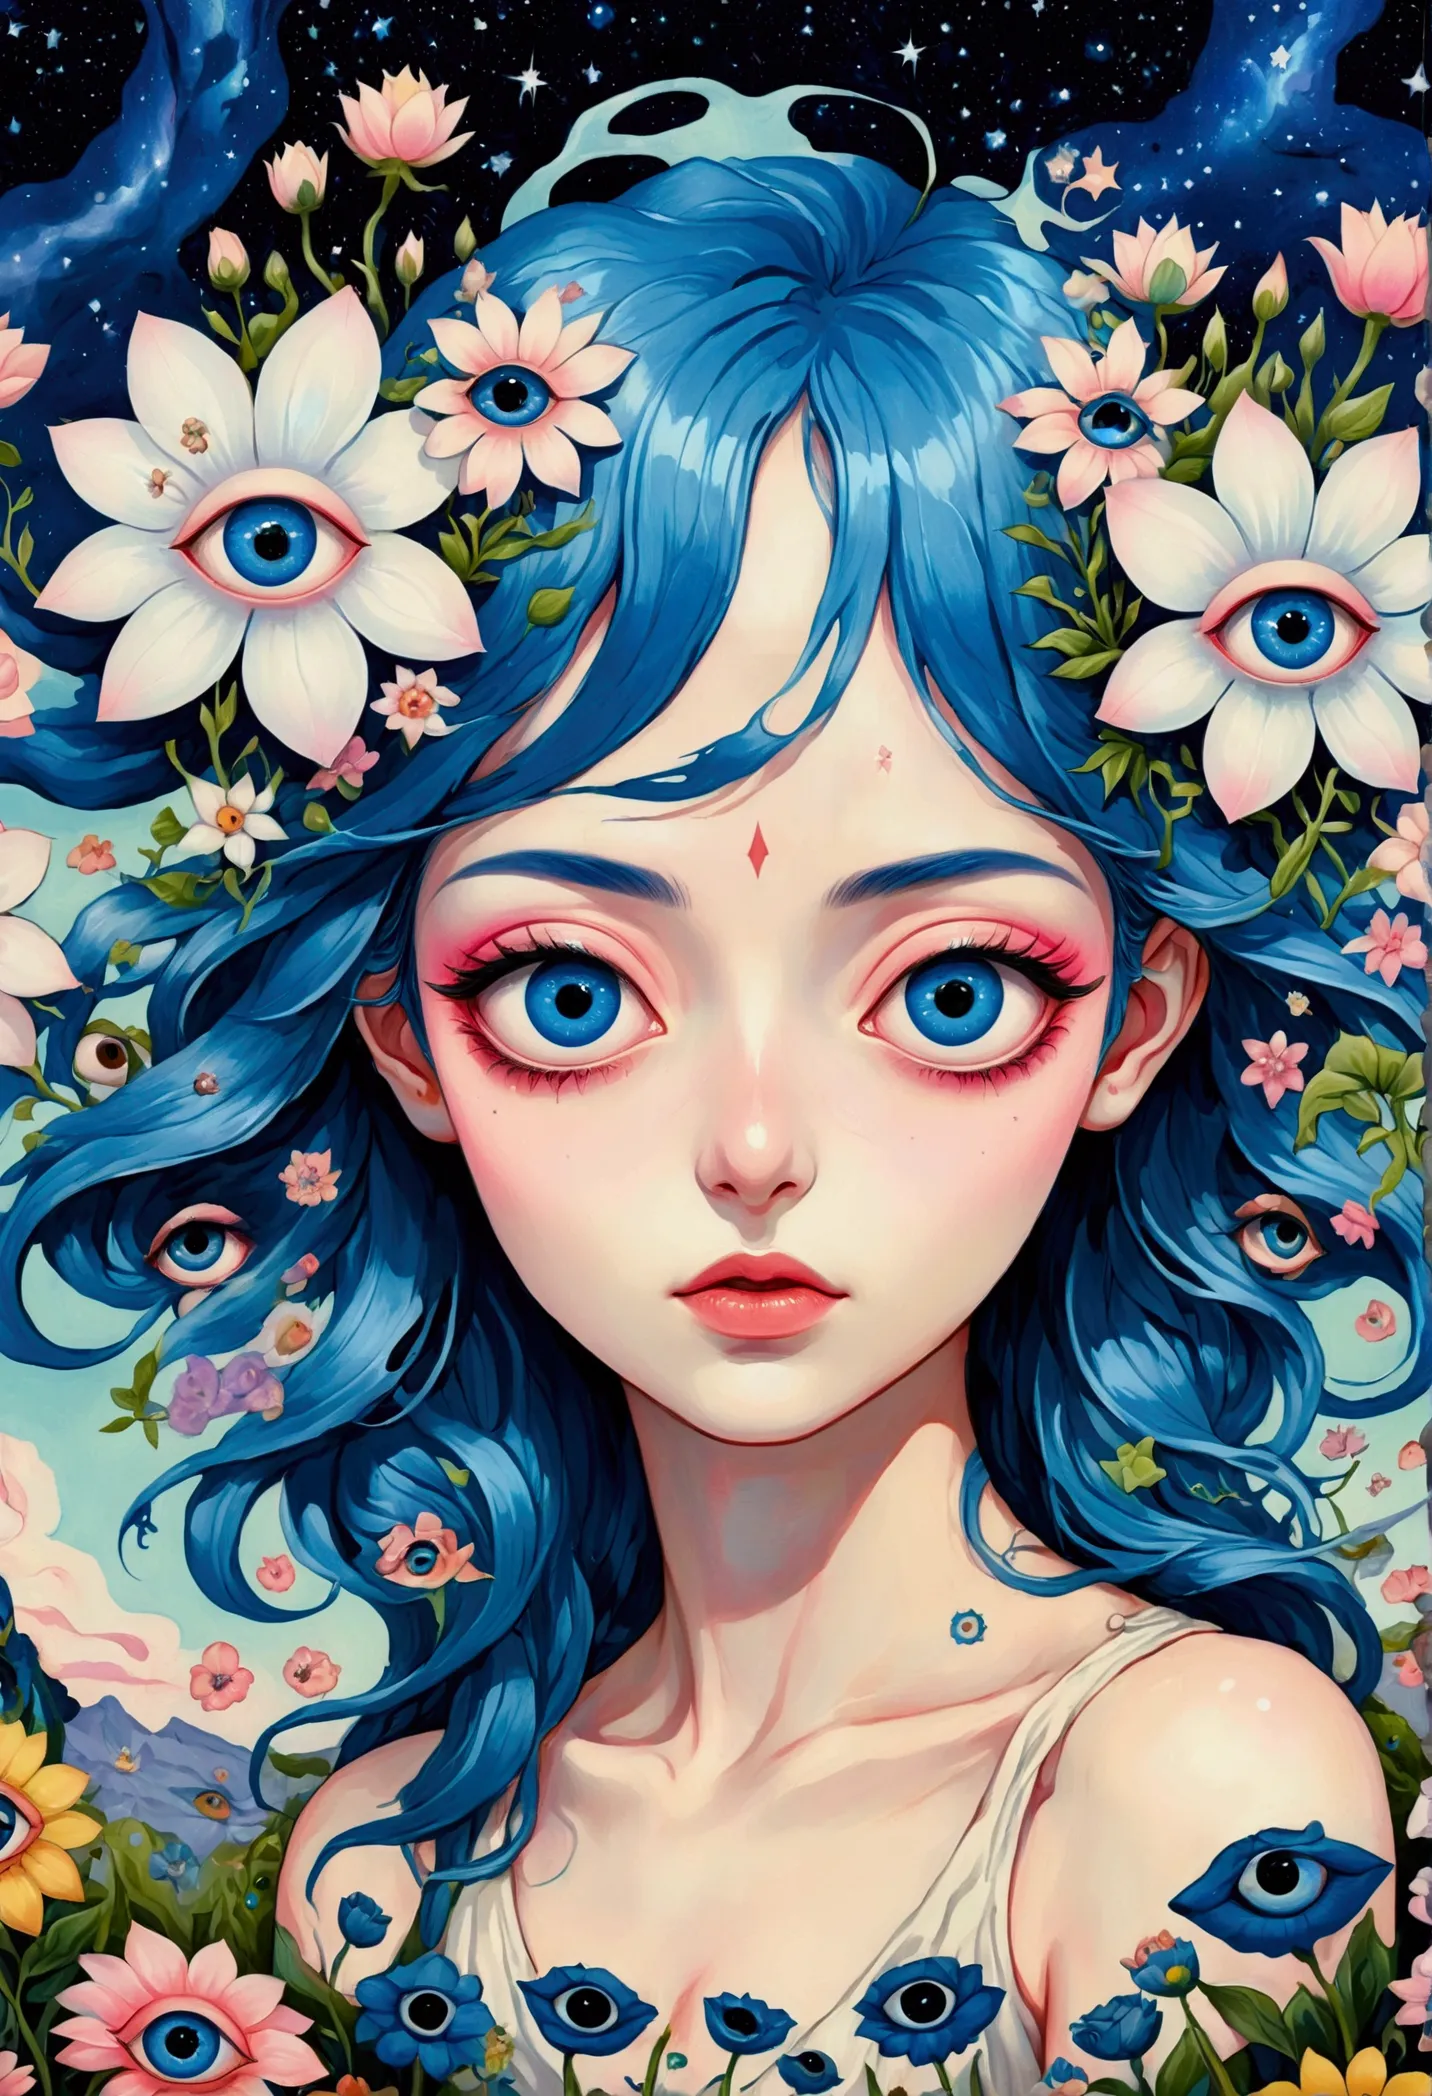 painting of a woman with blue hair and blue eyes surrounded by flowers, pop surrealism lowbrow art style, lowbrow pop surrealism...